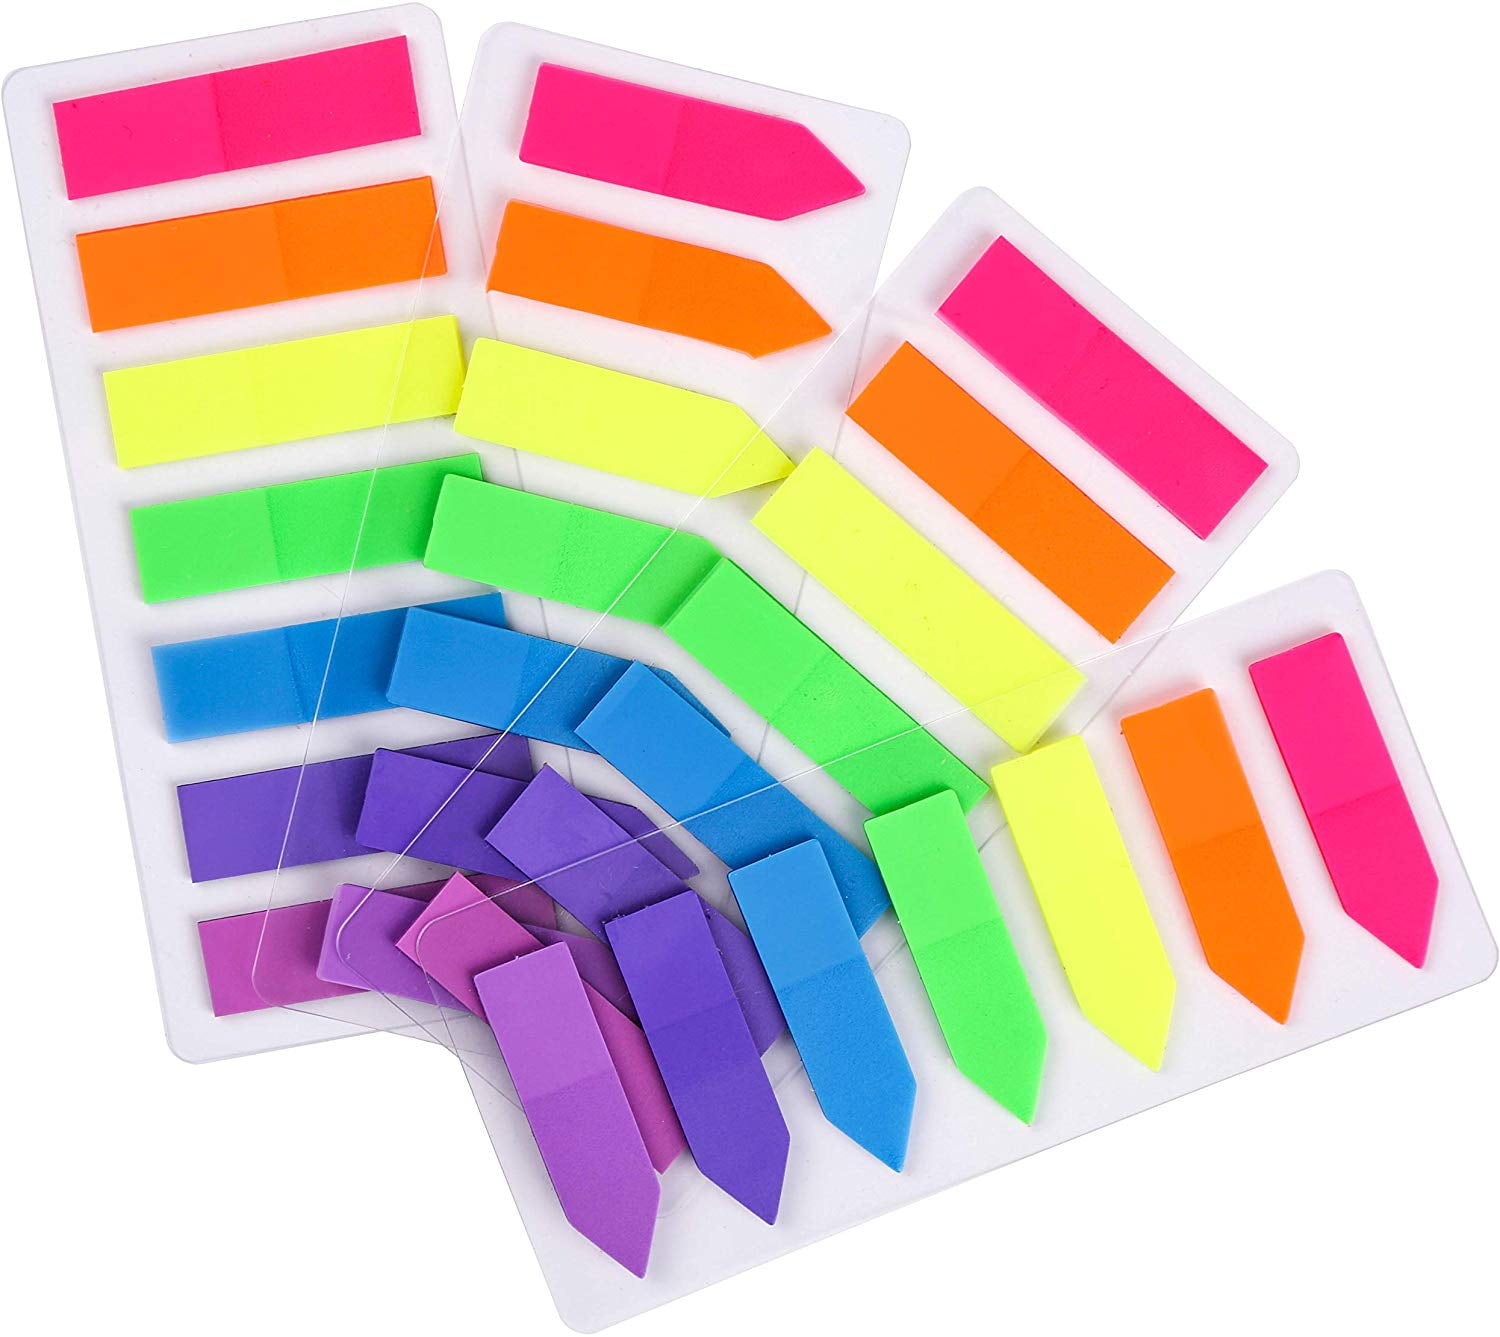 Writable Flags Index Tabs Multicolour Index Tabs Reading Notes Page Bookmarks Mixed Colors File Folders A3MLDBQT Books Notes Page Markers for Reading Index 480pcs Sticky Tabs